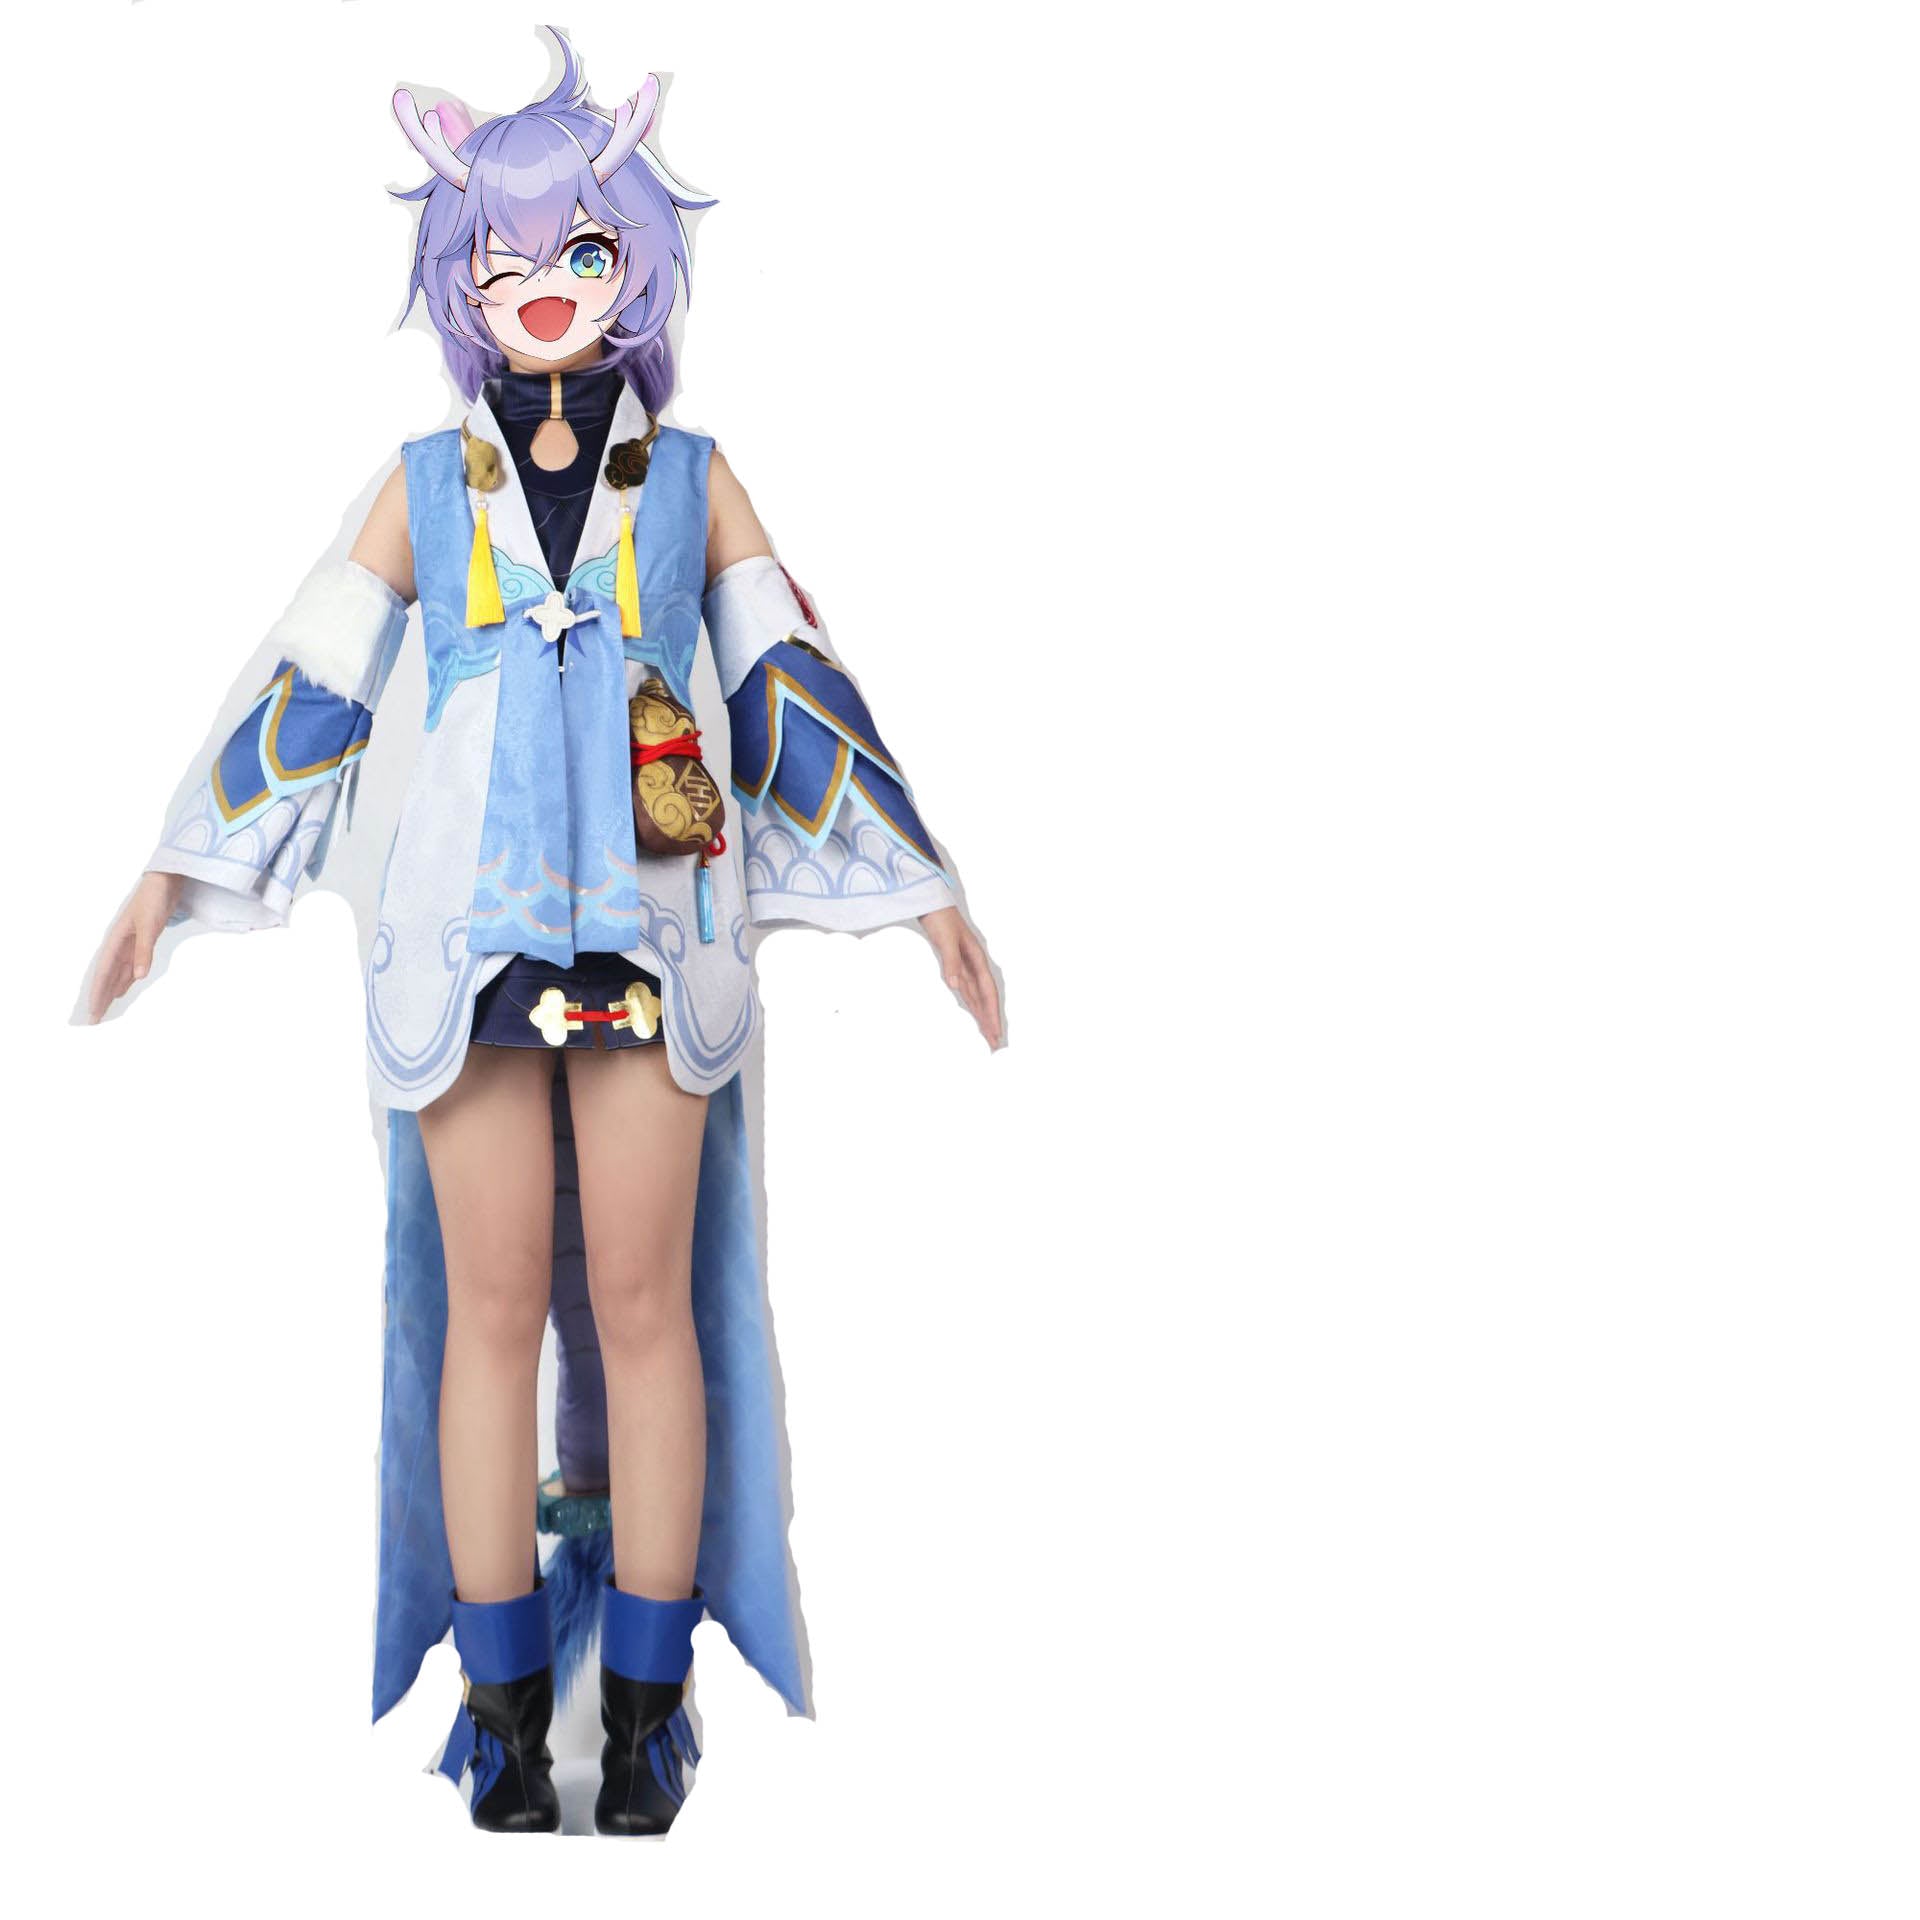 Rulercosplay Honkai Star Rail Bailu Uniform Suit Cosplay Costume With Accessories For Halloween Party